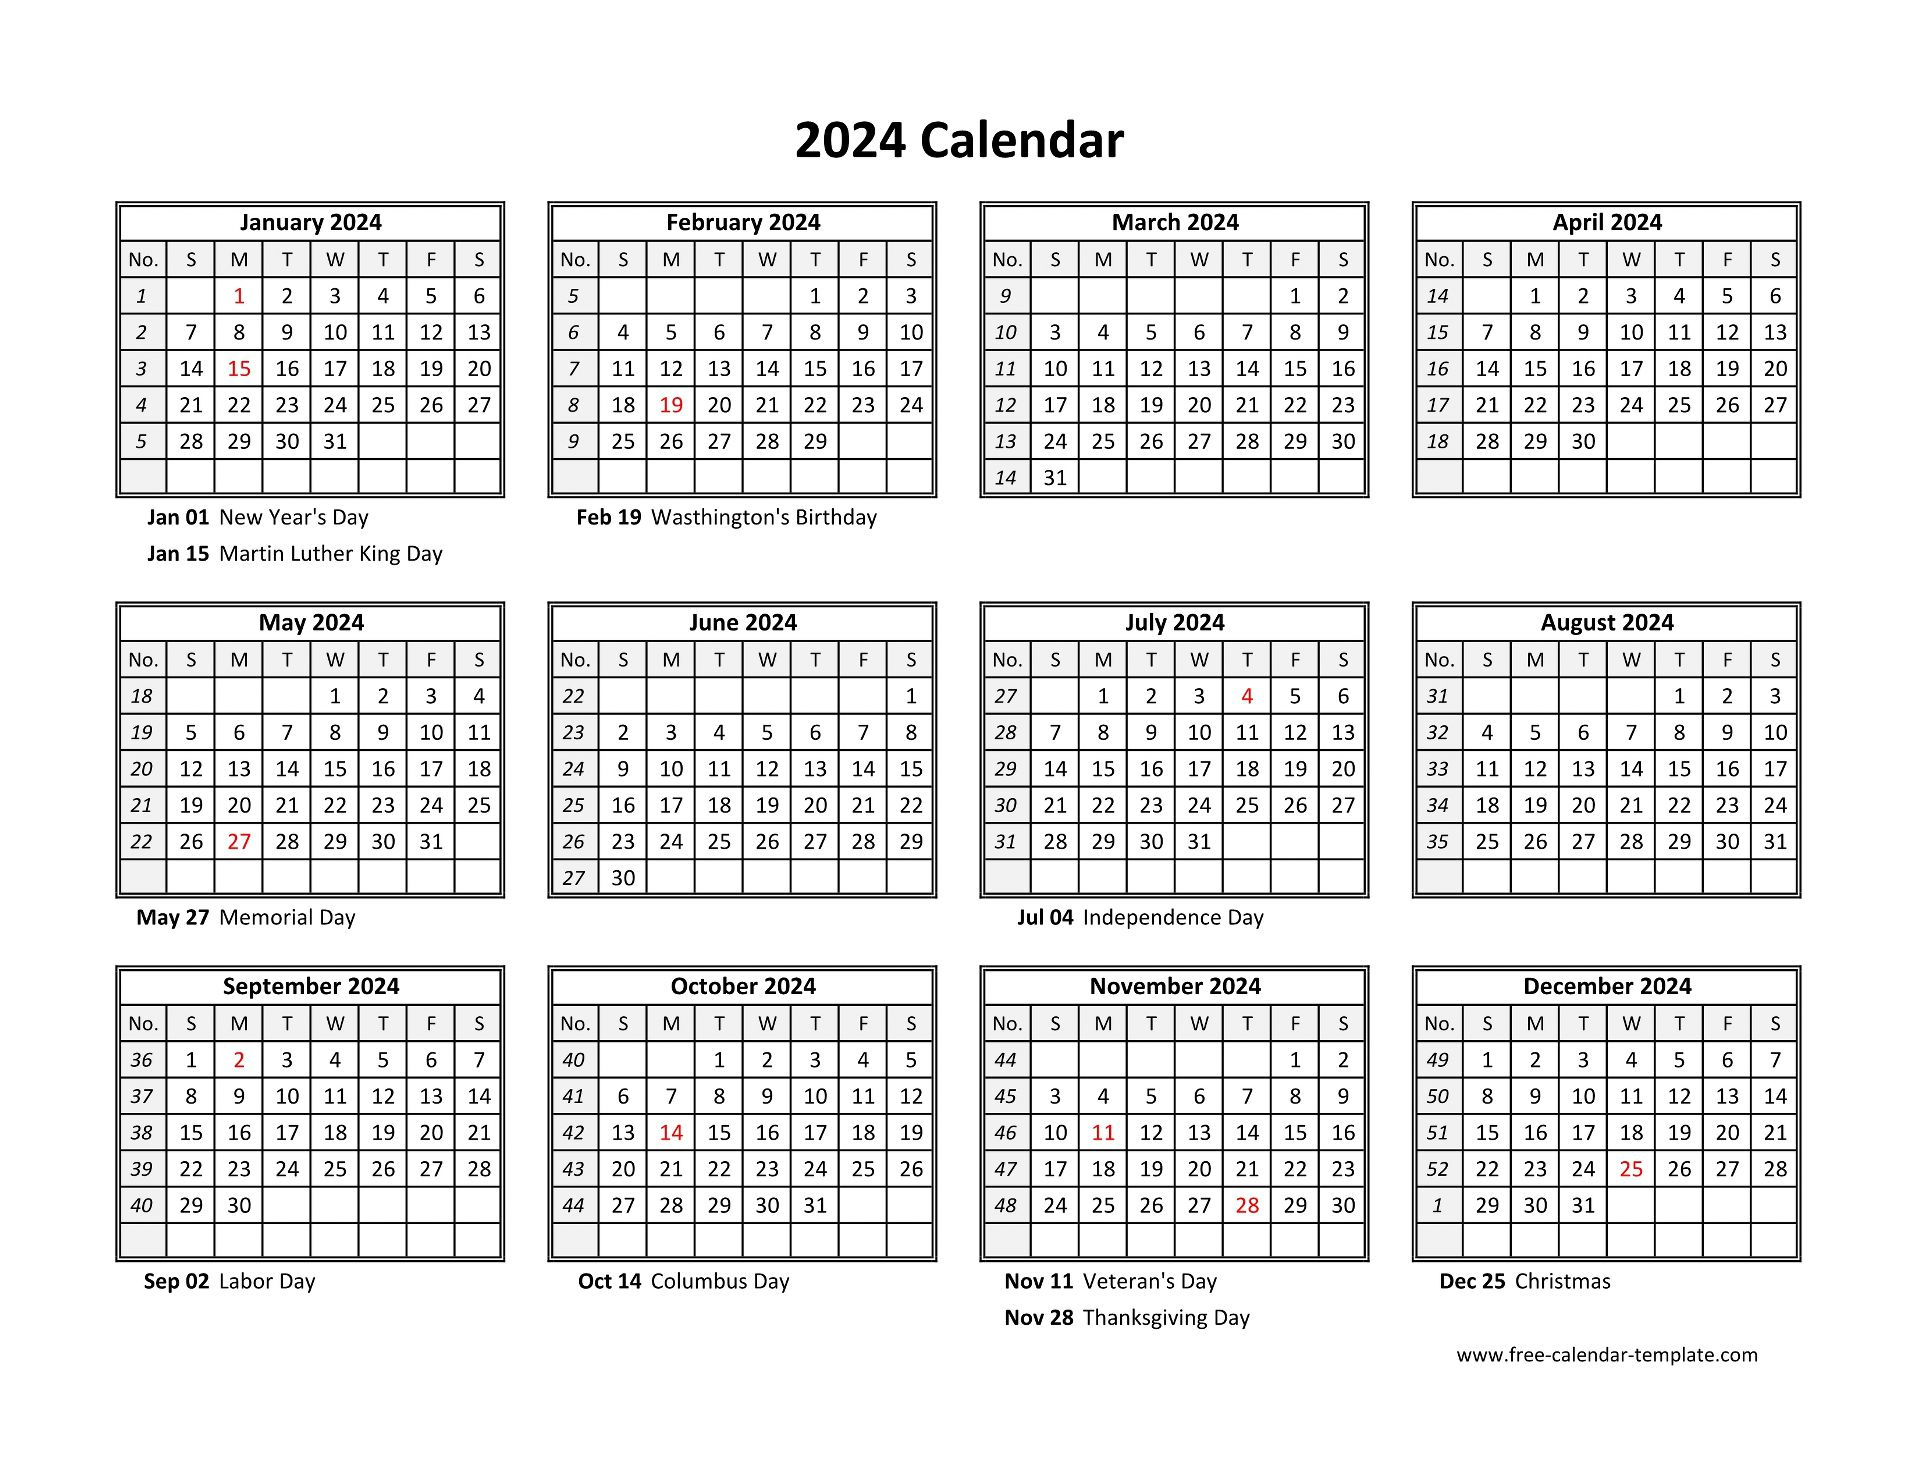 Yearly Calendar 2024 Printable With Federal Holidays | Free | Year At A Glance Calendar 2024 Printable